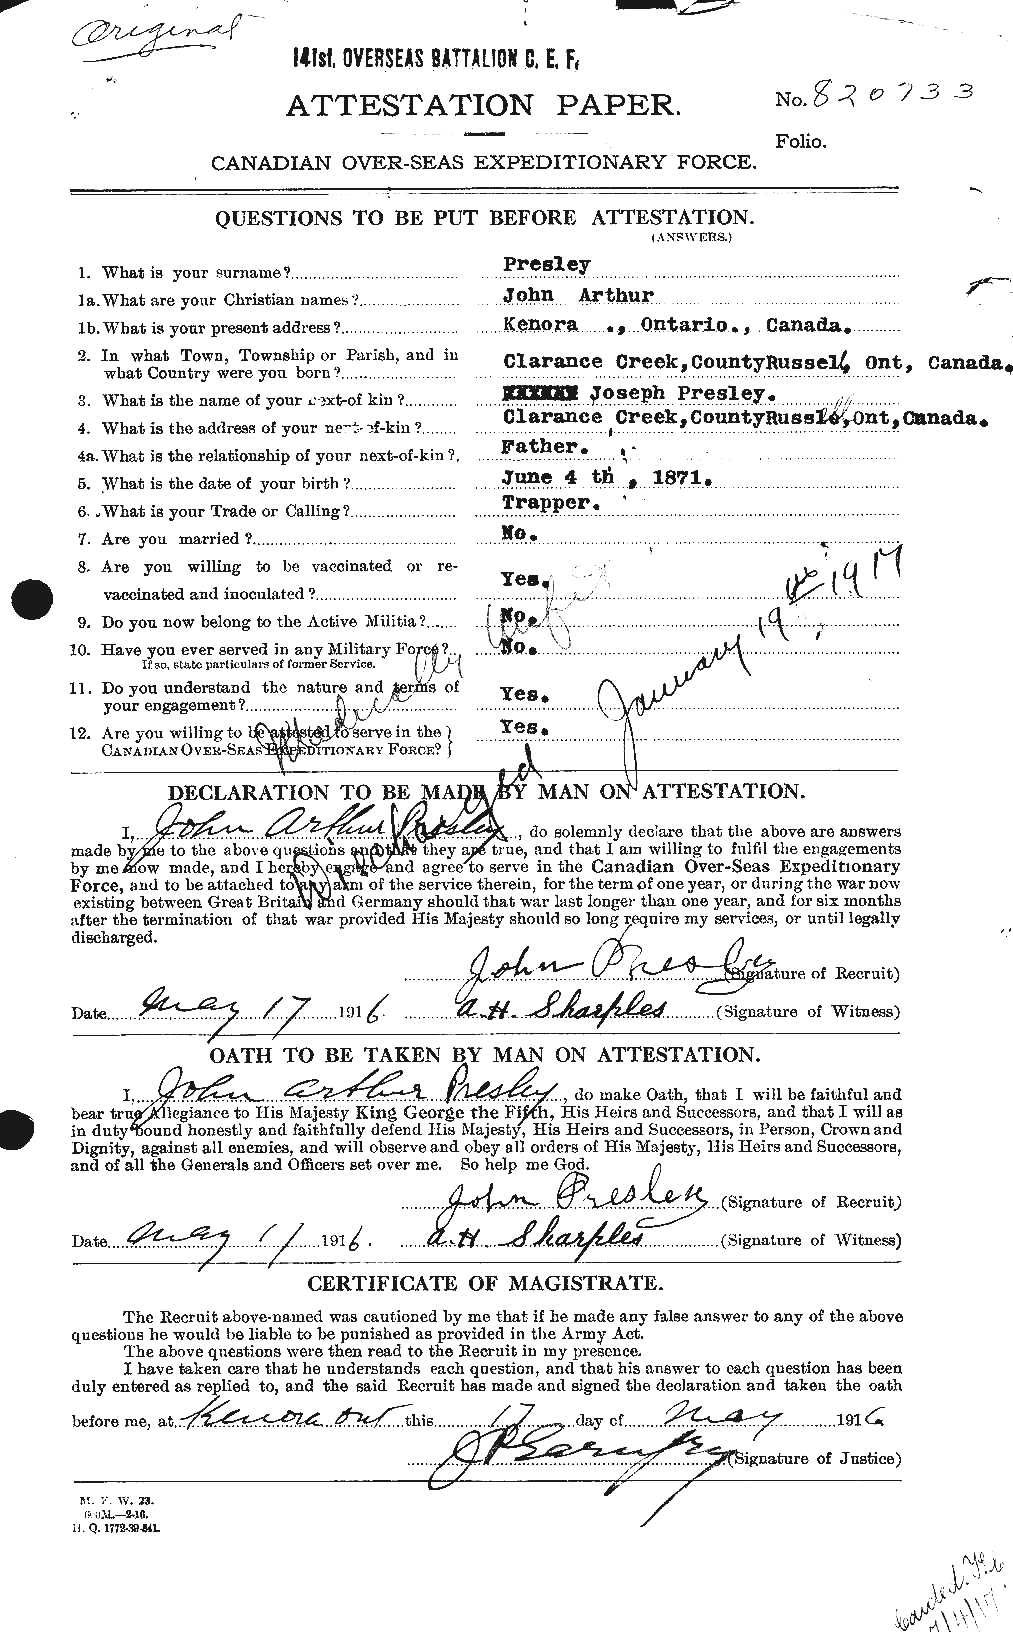 Personnel Records of the First World War - CEF 584256a